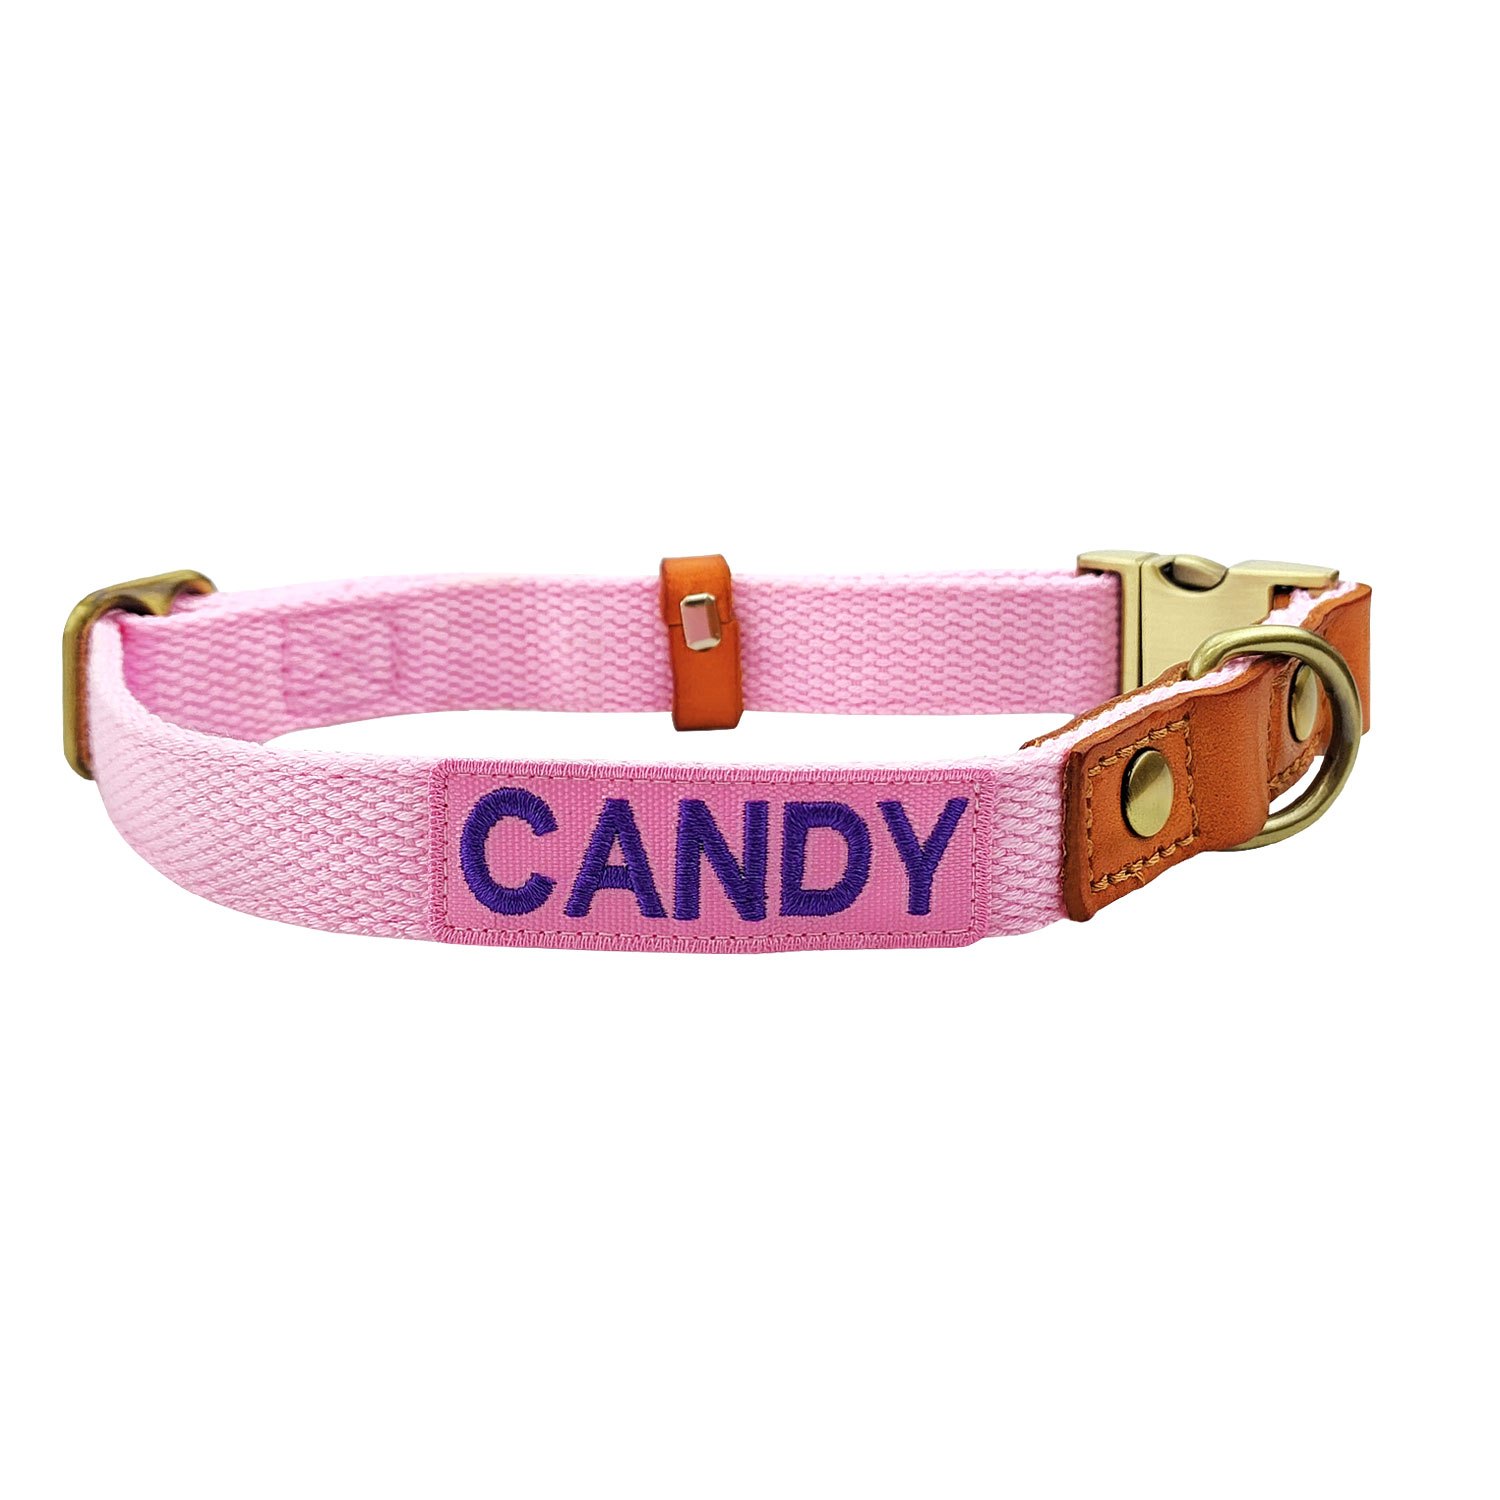 Personalized Dog Collar With Embroidered Pet Name, Adjustable